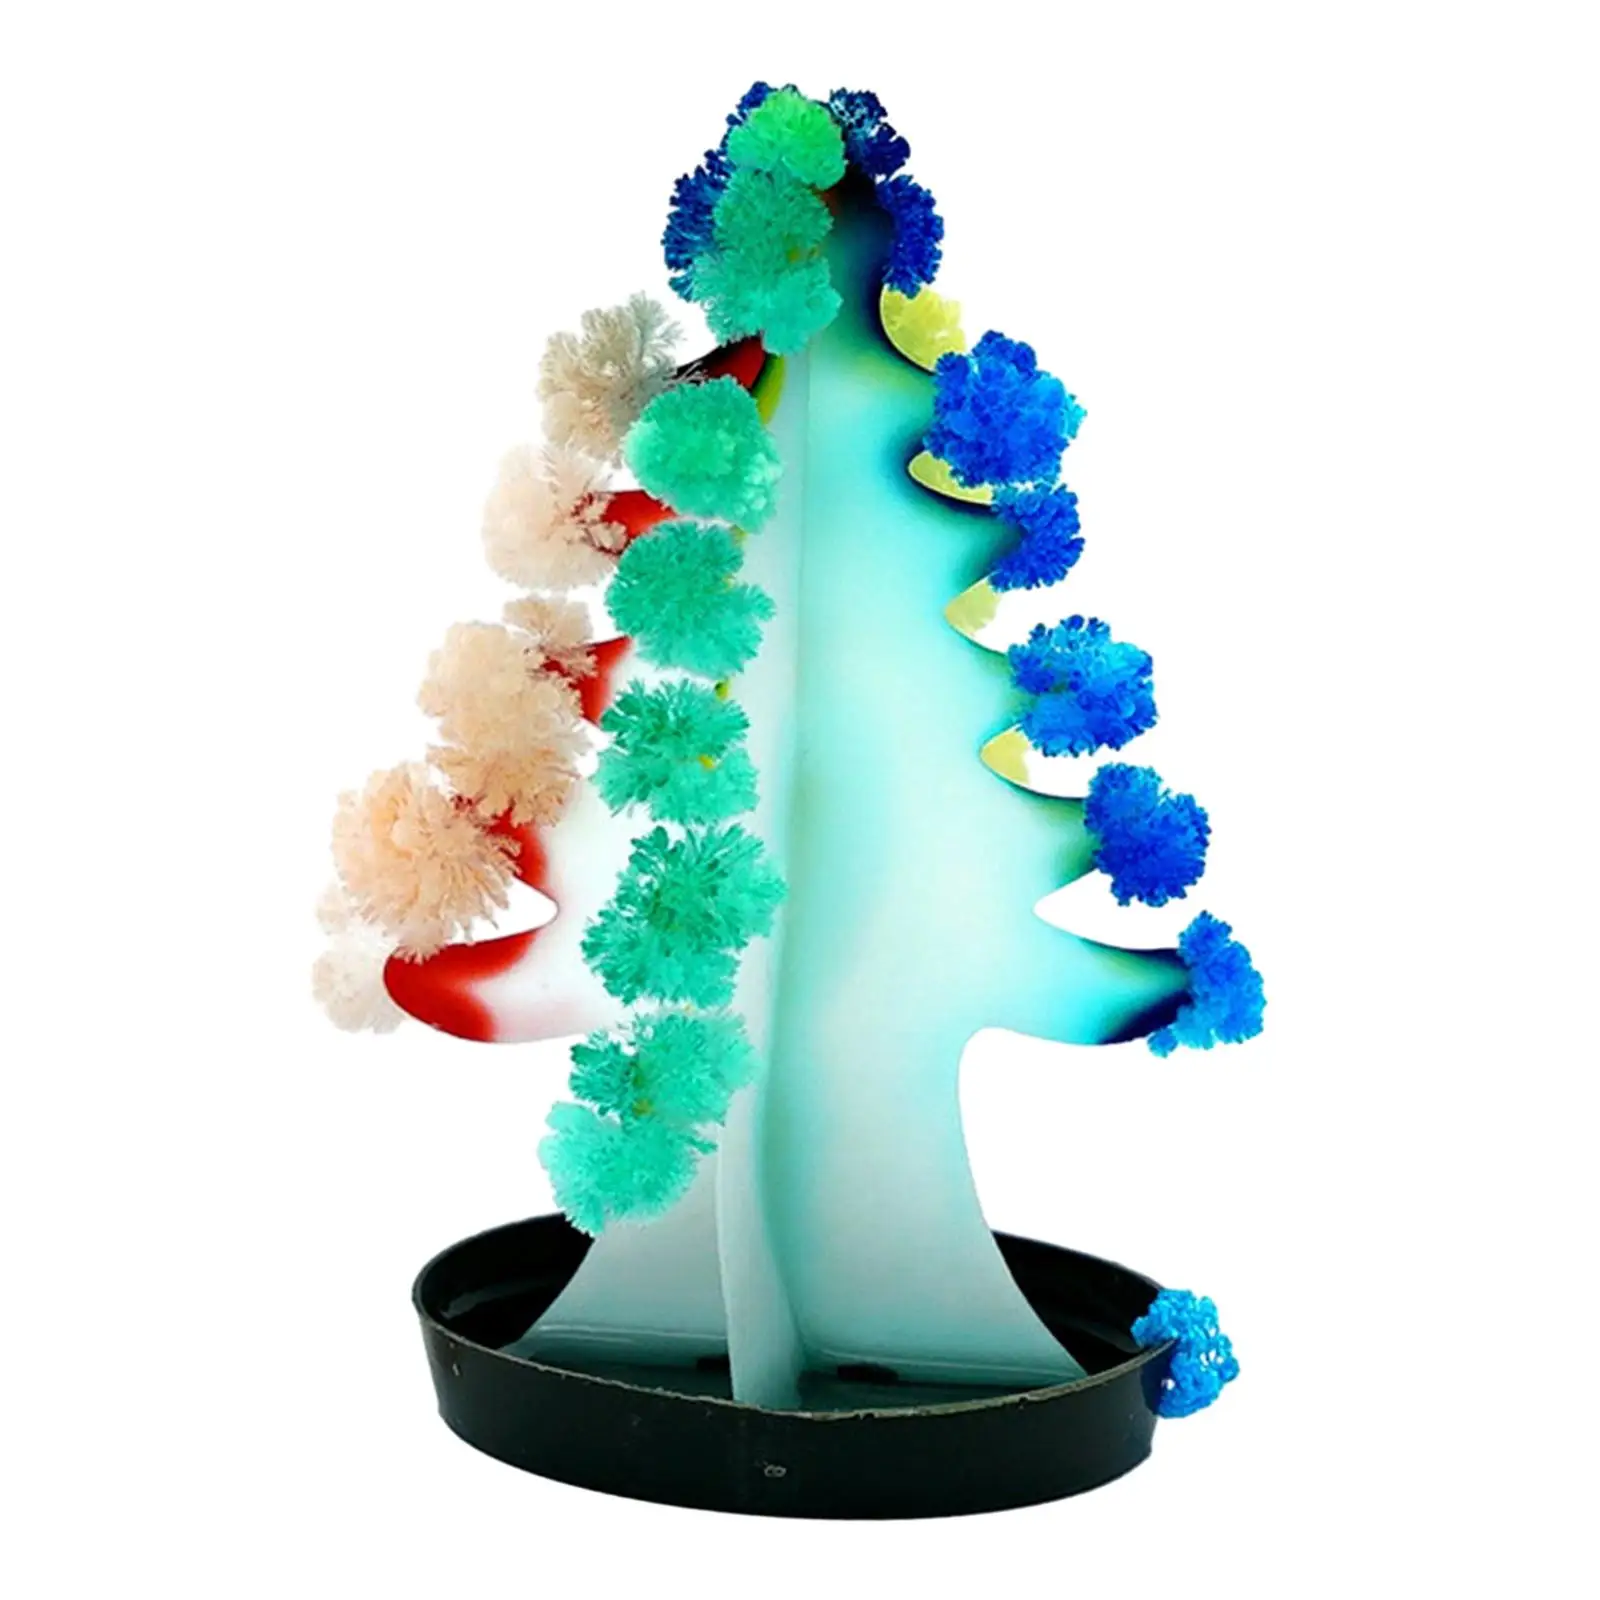 

Magic Growing Christmas Tree Bloom Tree Party Favors Boys Girls Educational Toy Xmas Gift Interesting Novelty Ornaments Colorful